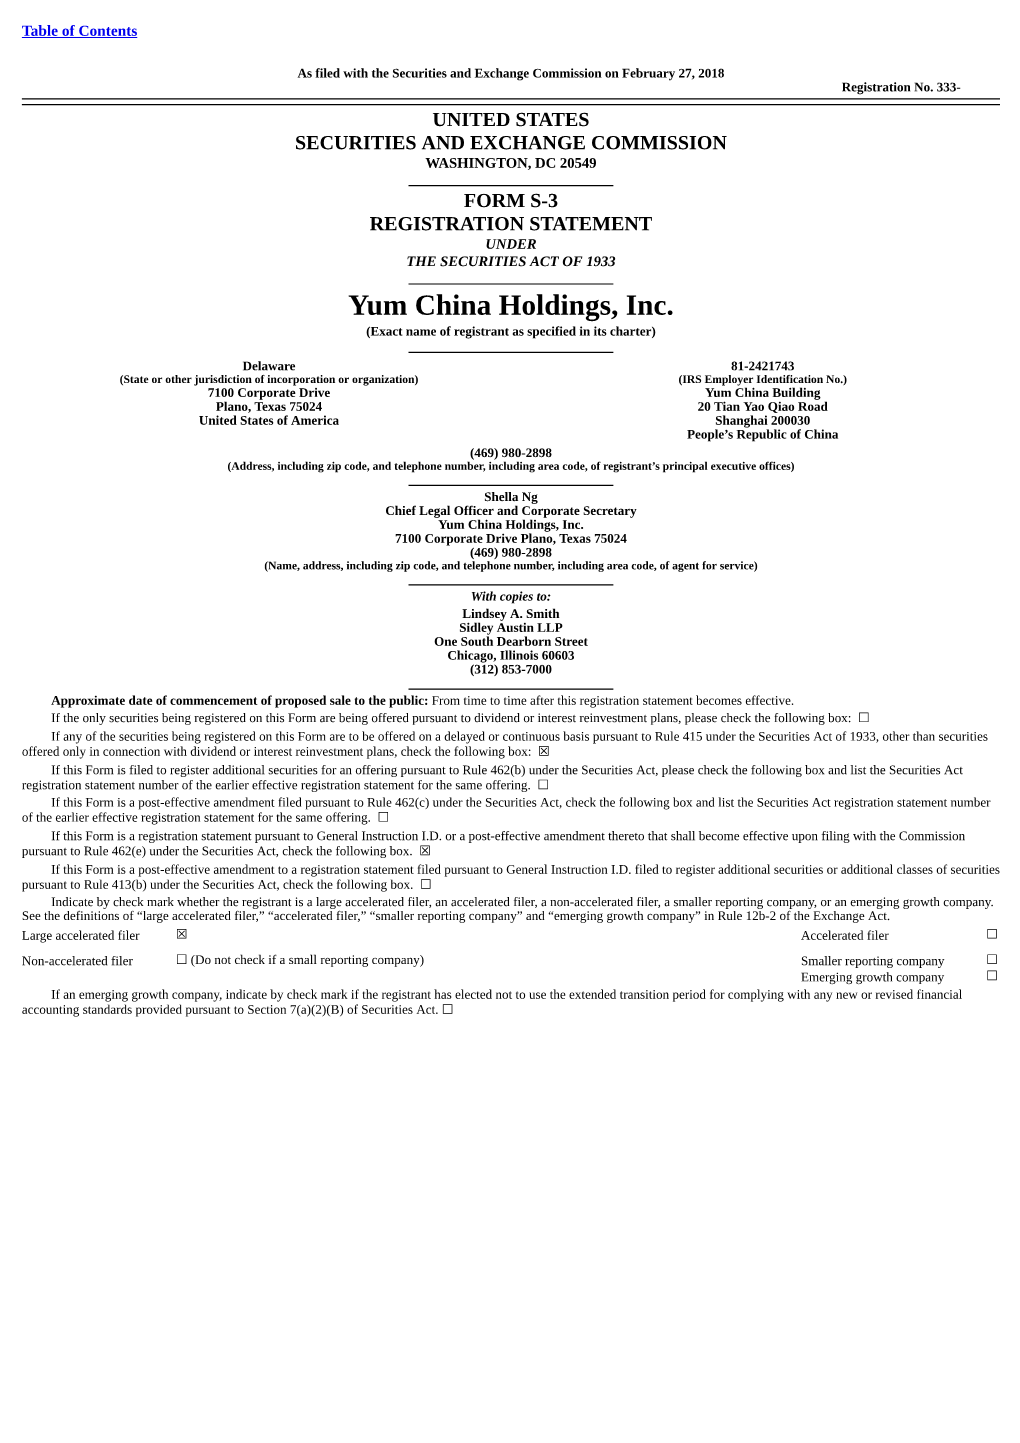 Yum China Holdings, Inc. (Exact Name of Registrant As Specified in Its Charter)